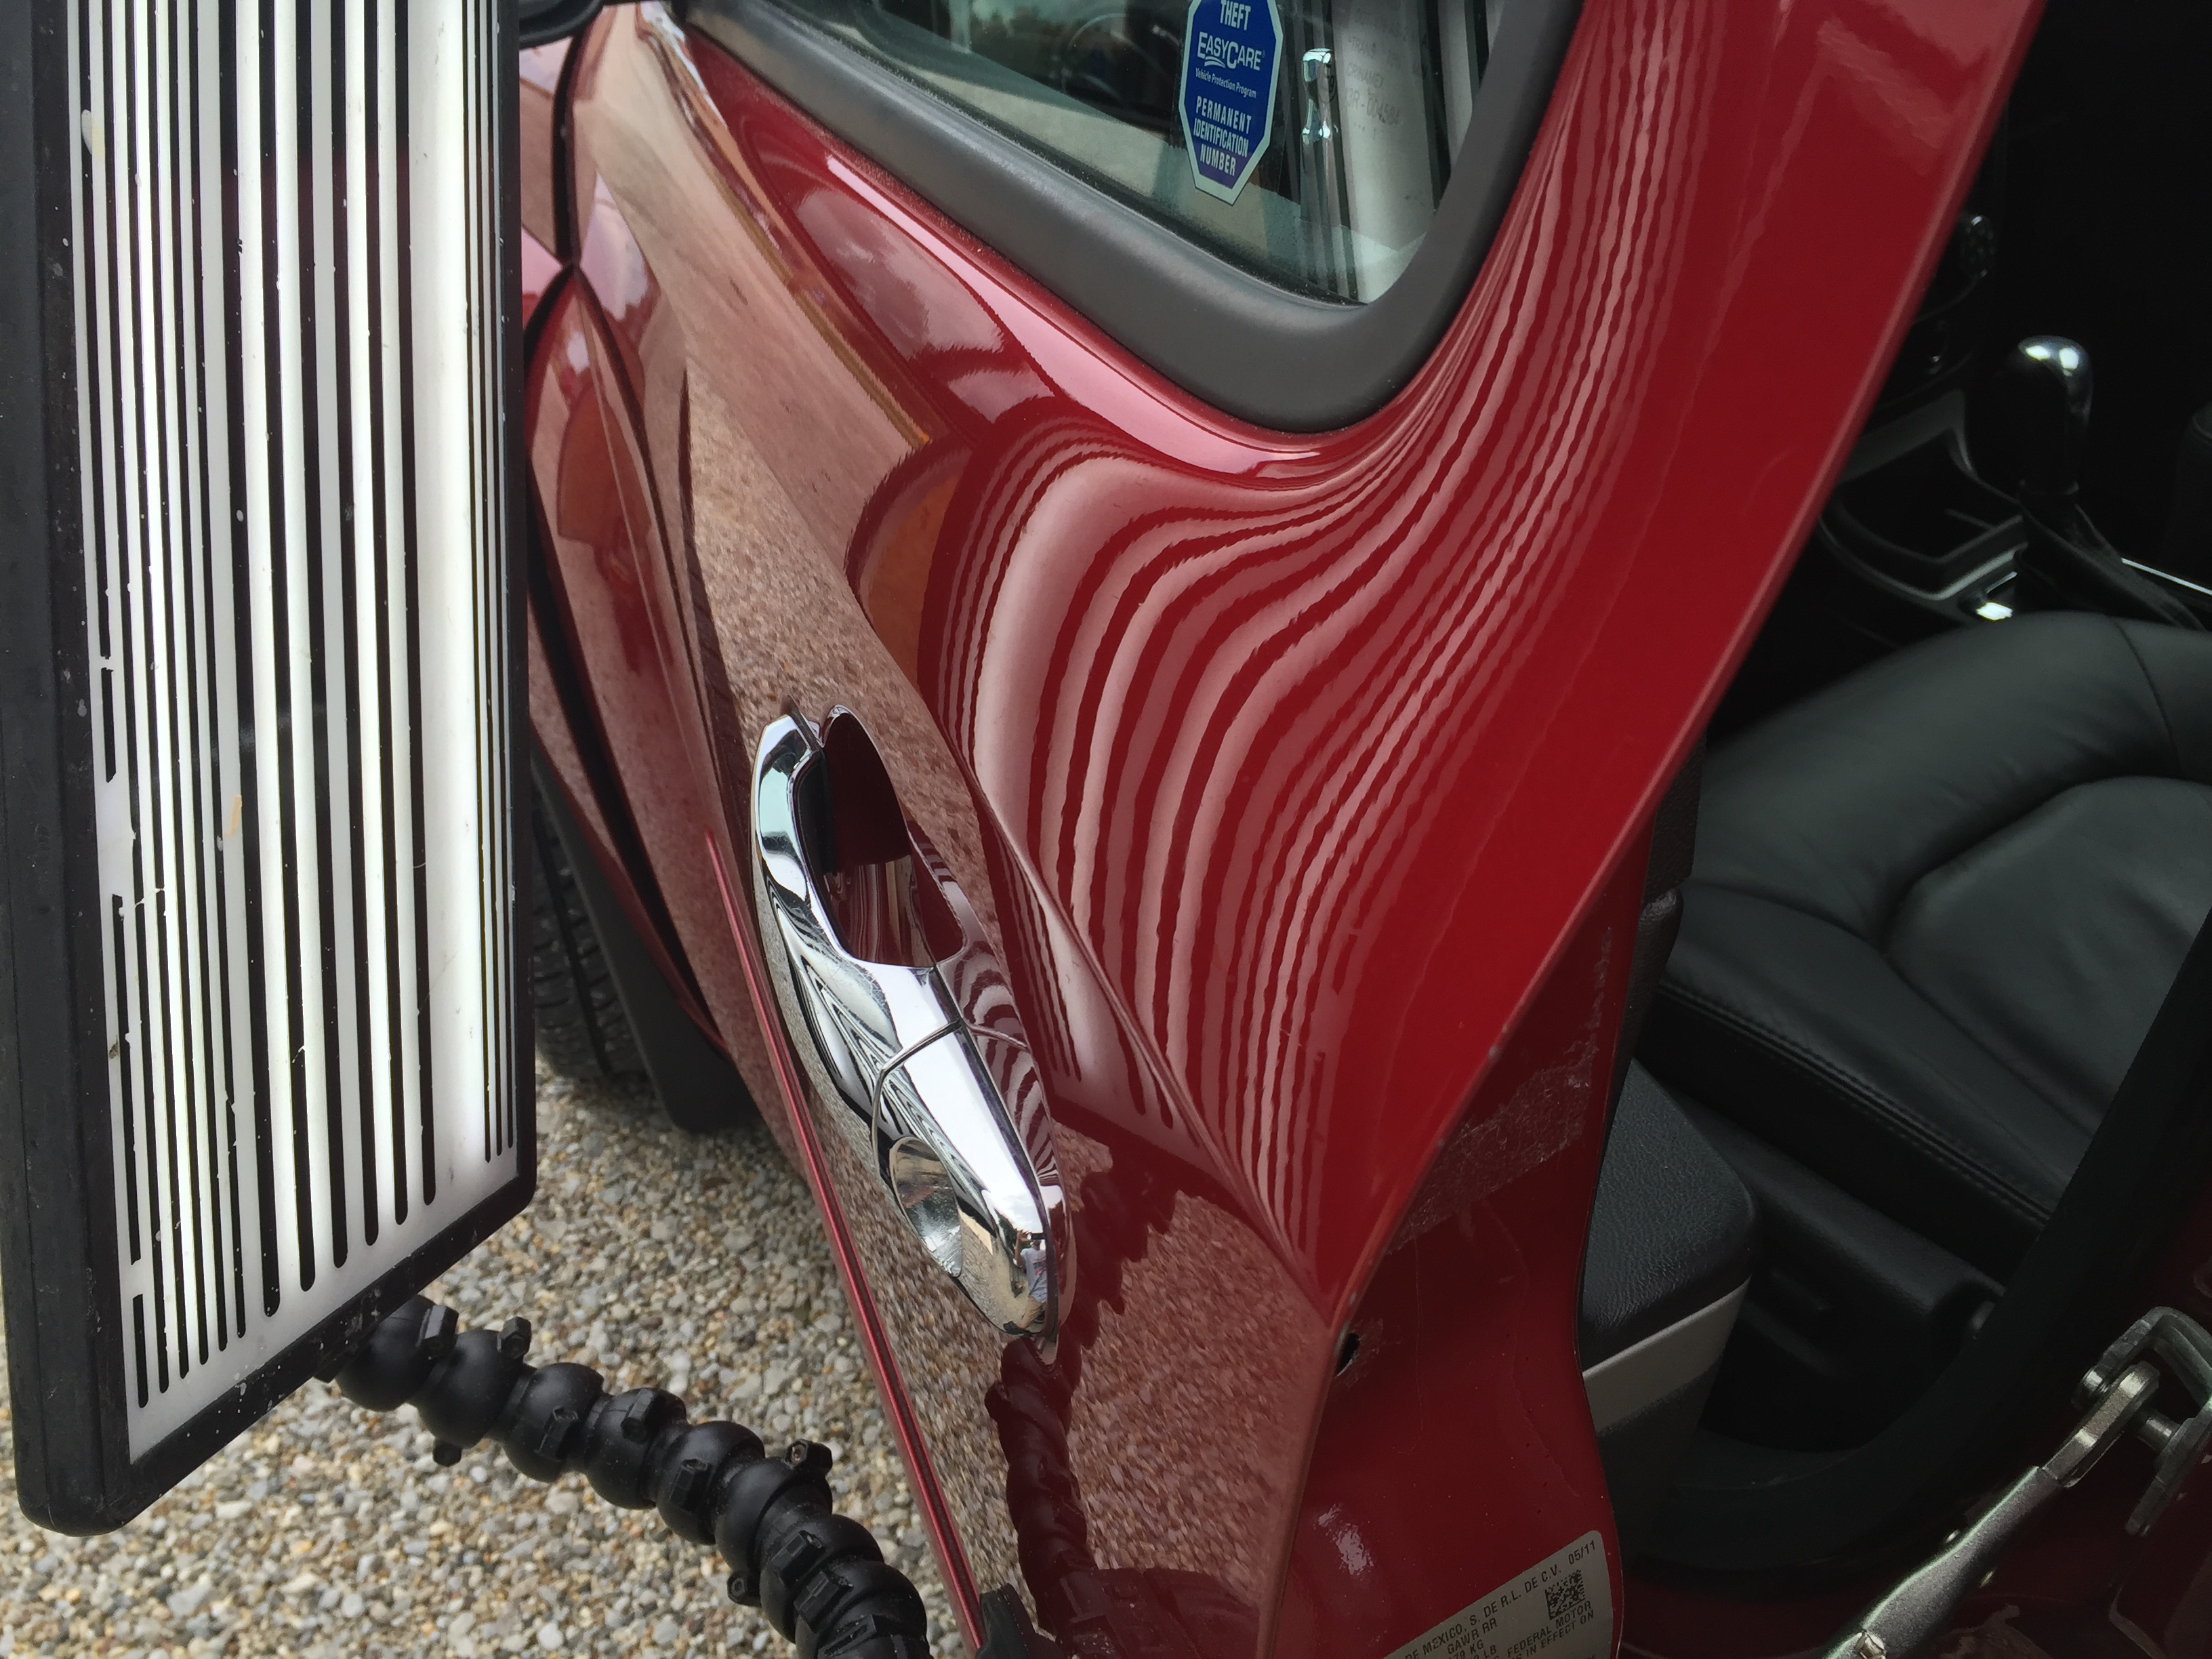 2011 Chevy HHR, Dent Removal, Pana, IL. Sharp dent in drivers door, http://217dent.com